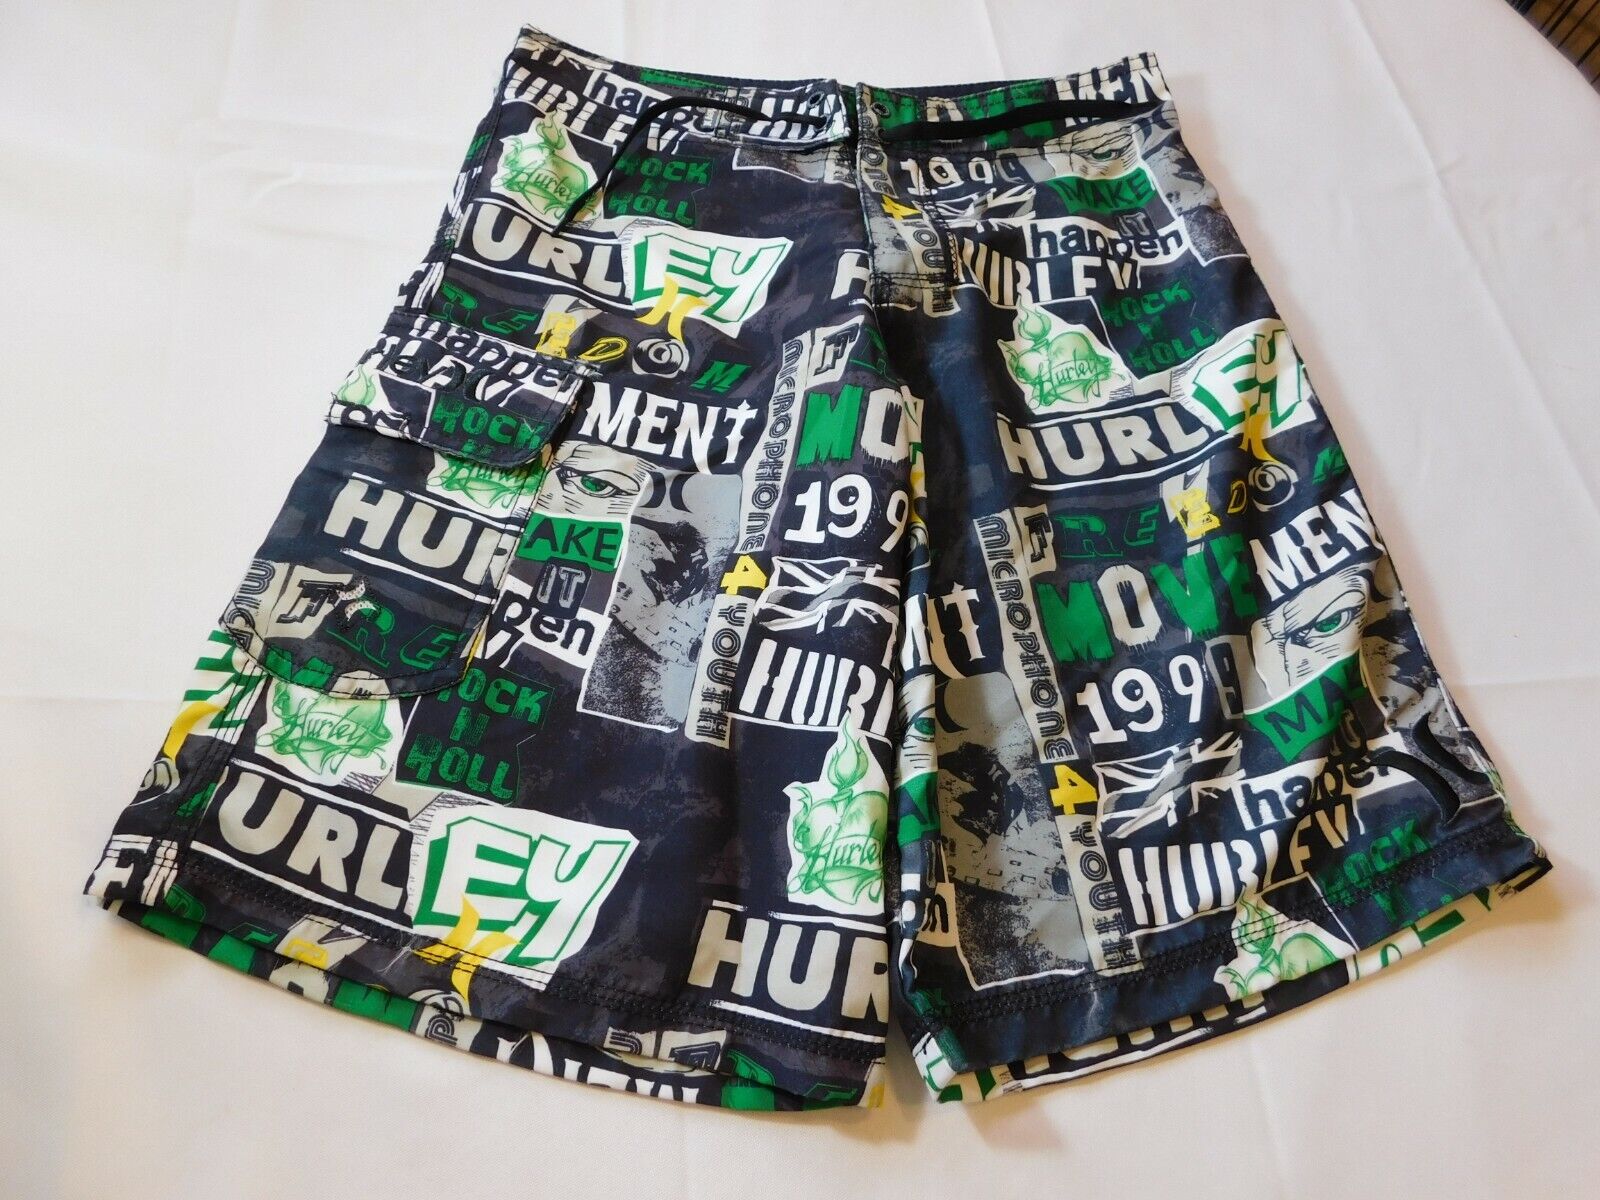 Hurley The Essence of Surf Boy's Youth Boardshort Board shorts...